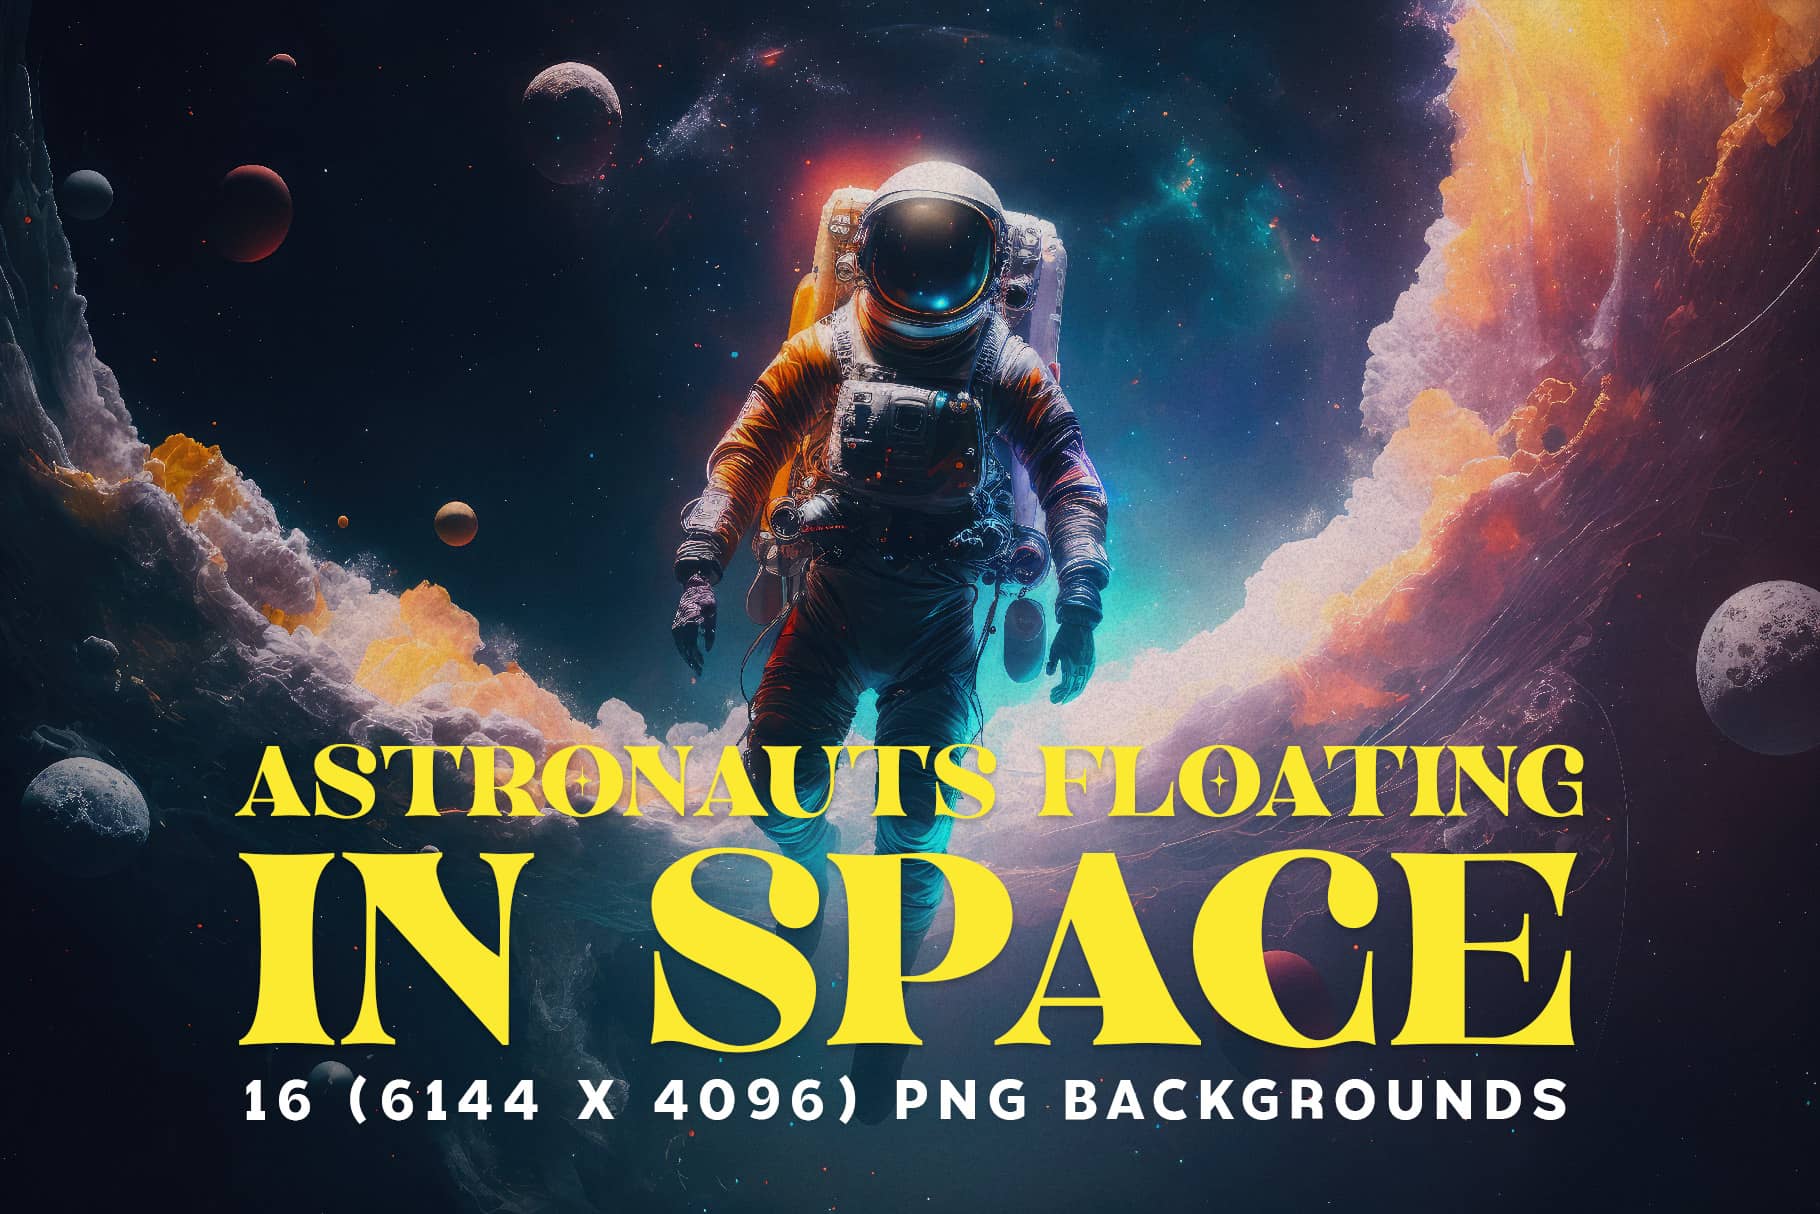 Astronauts Floating in Space Cover